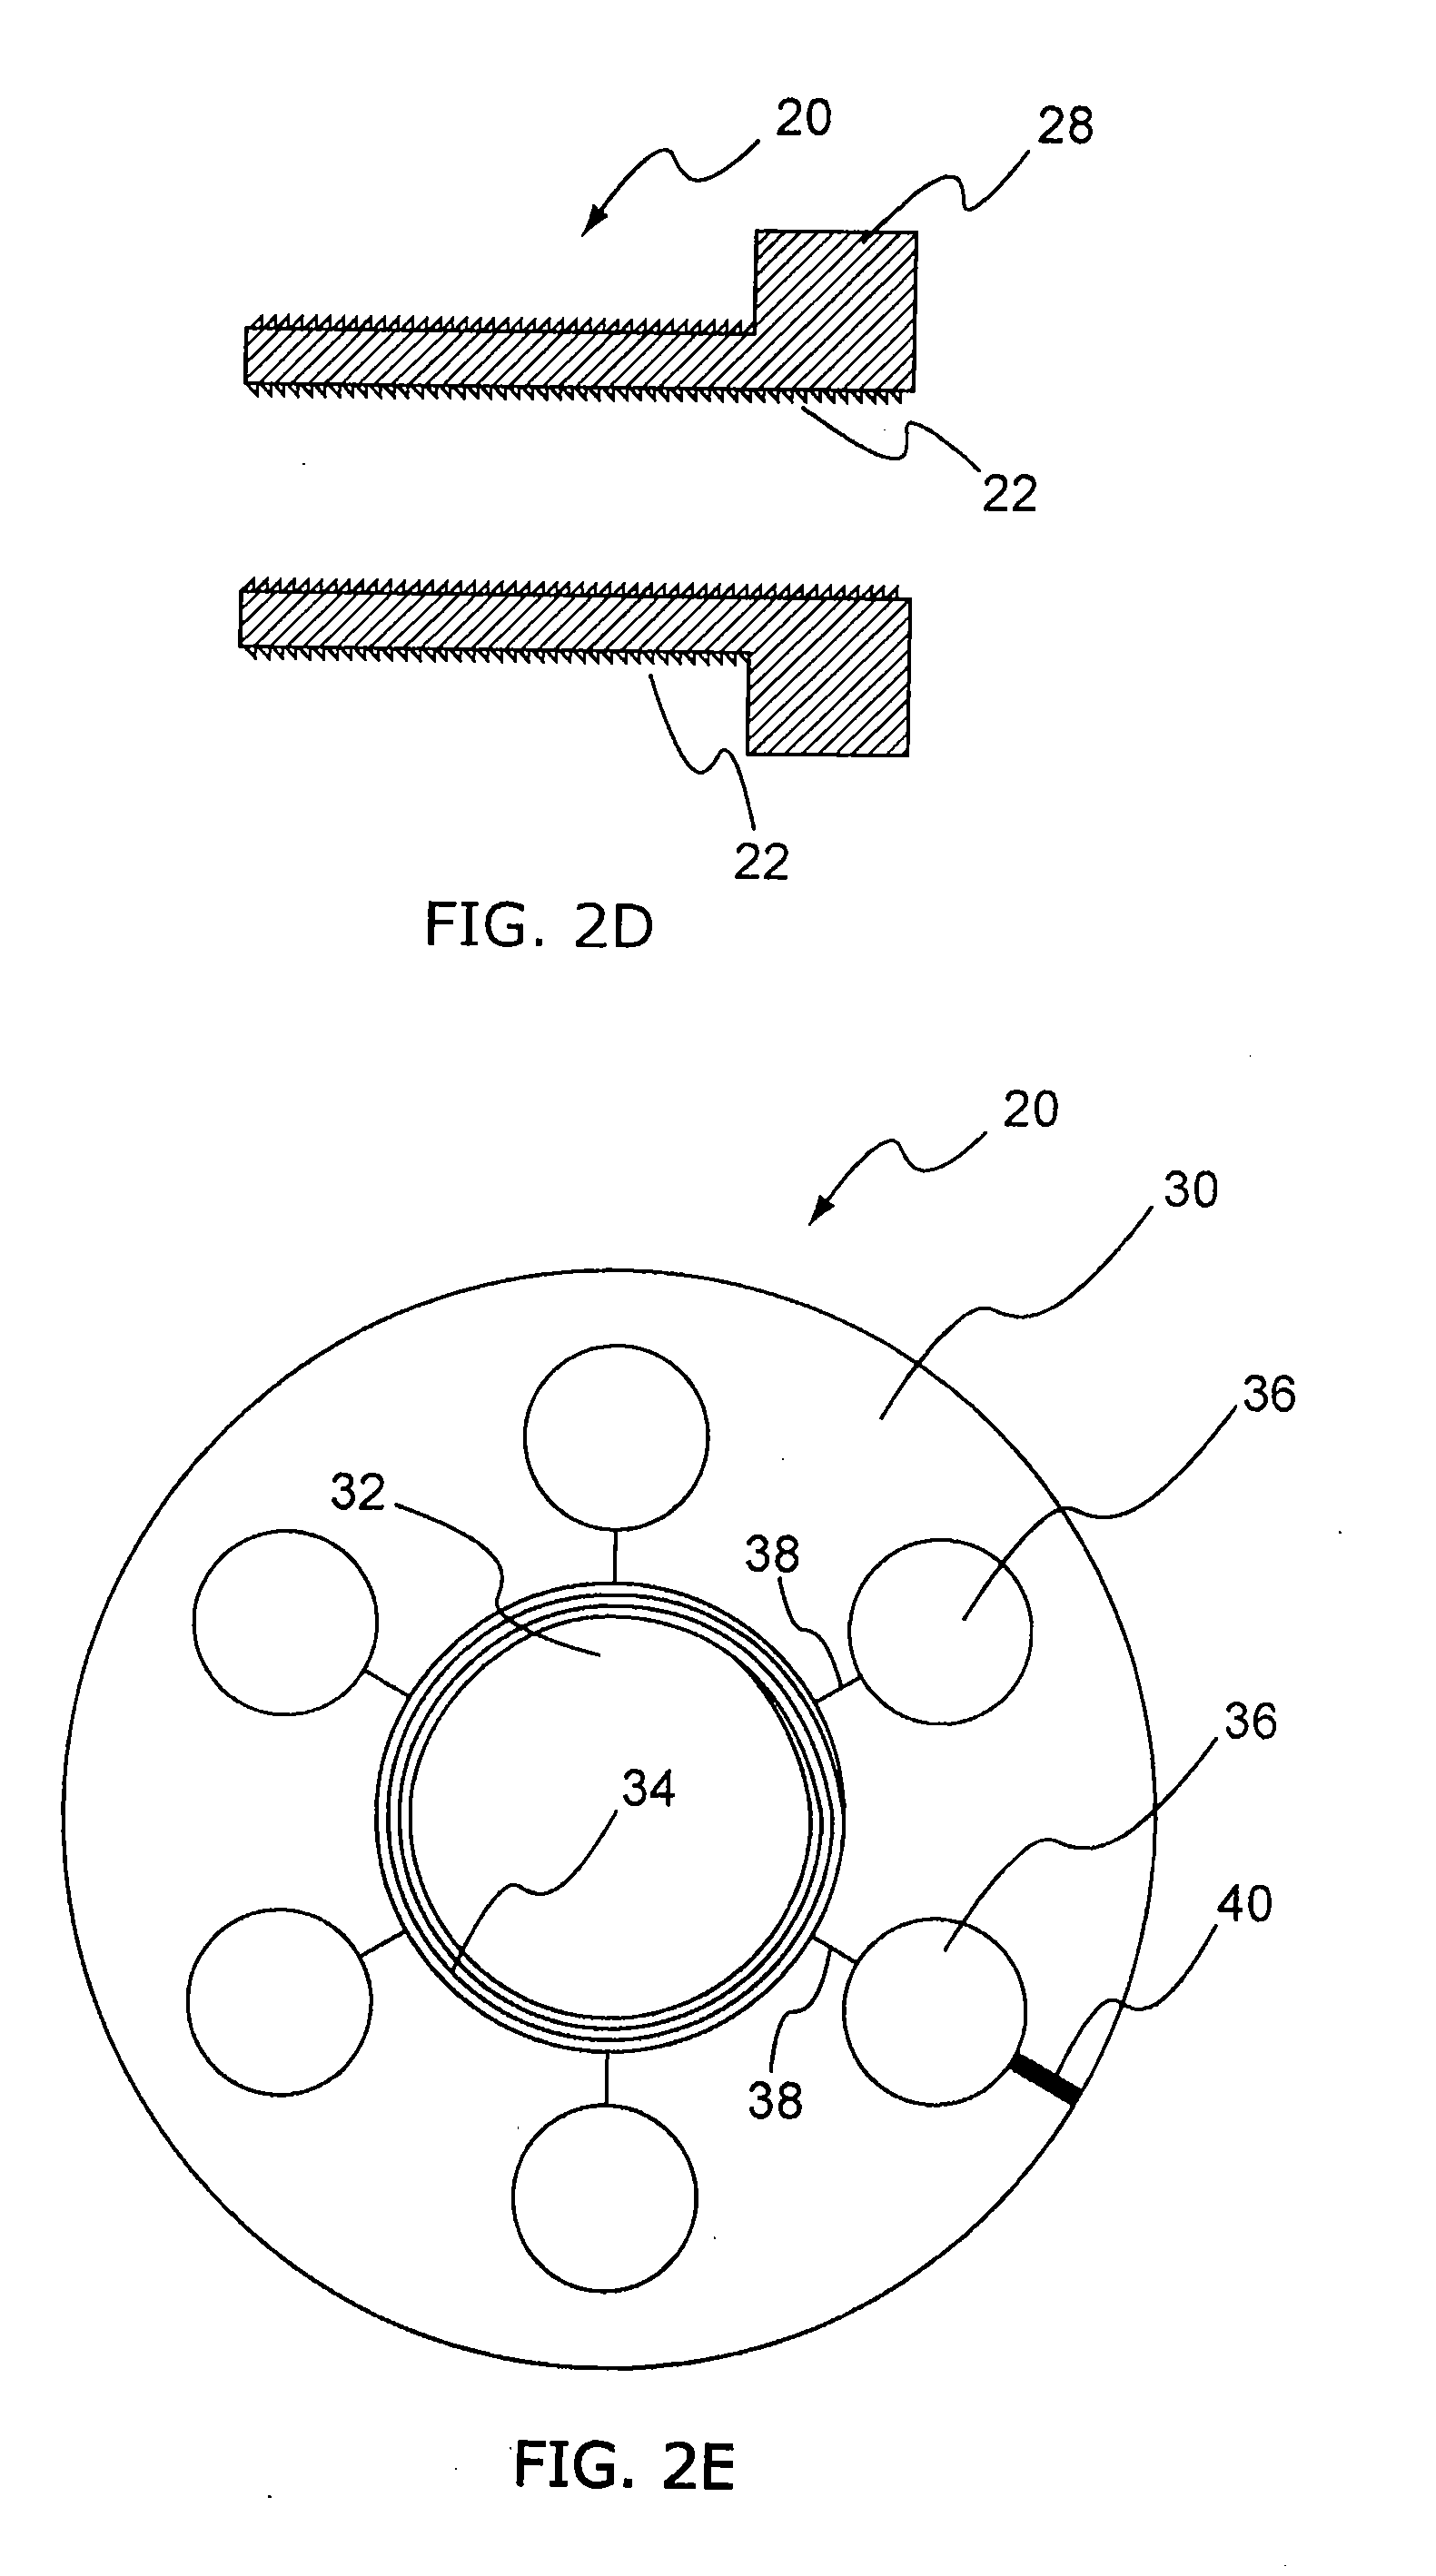 Cannulated bone screw system and method